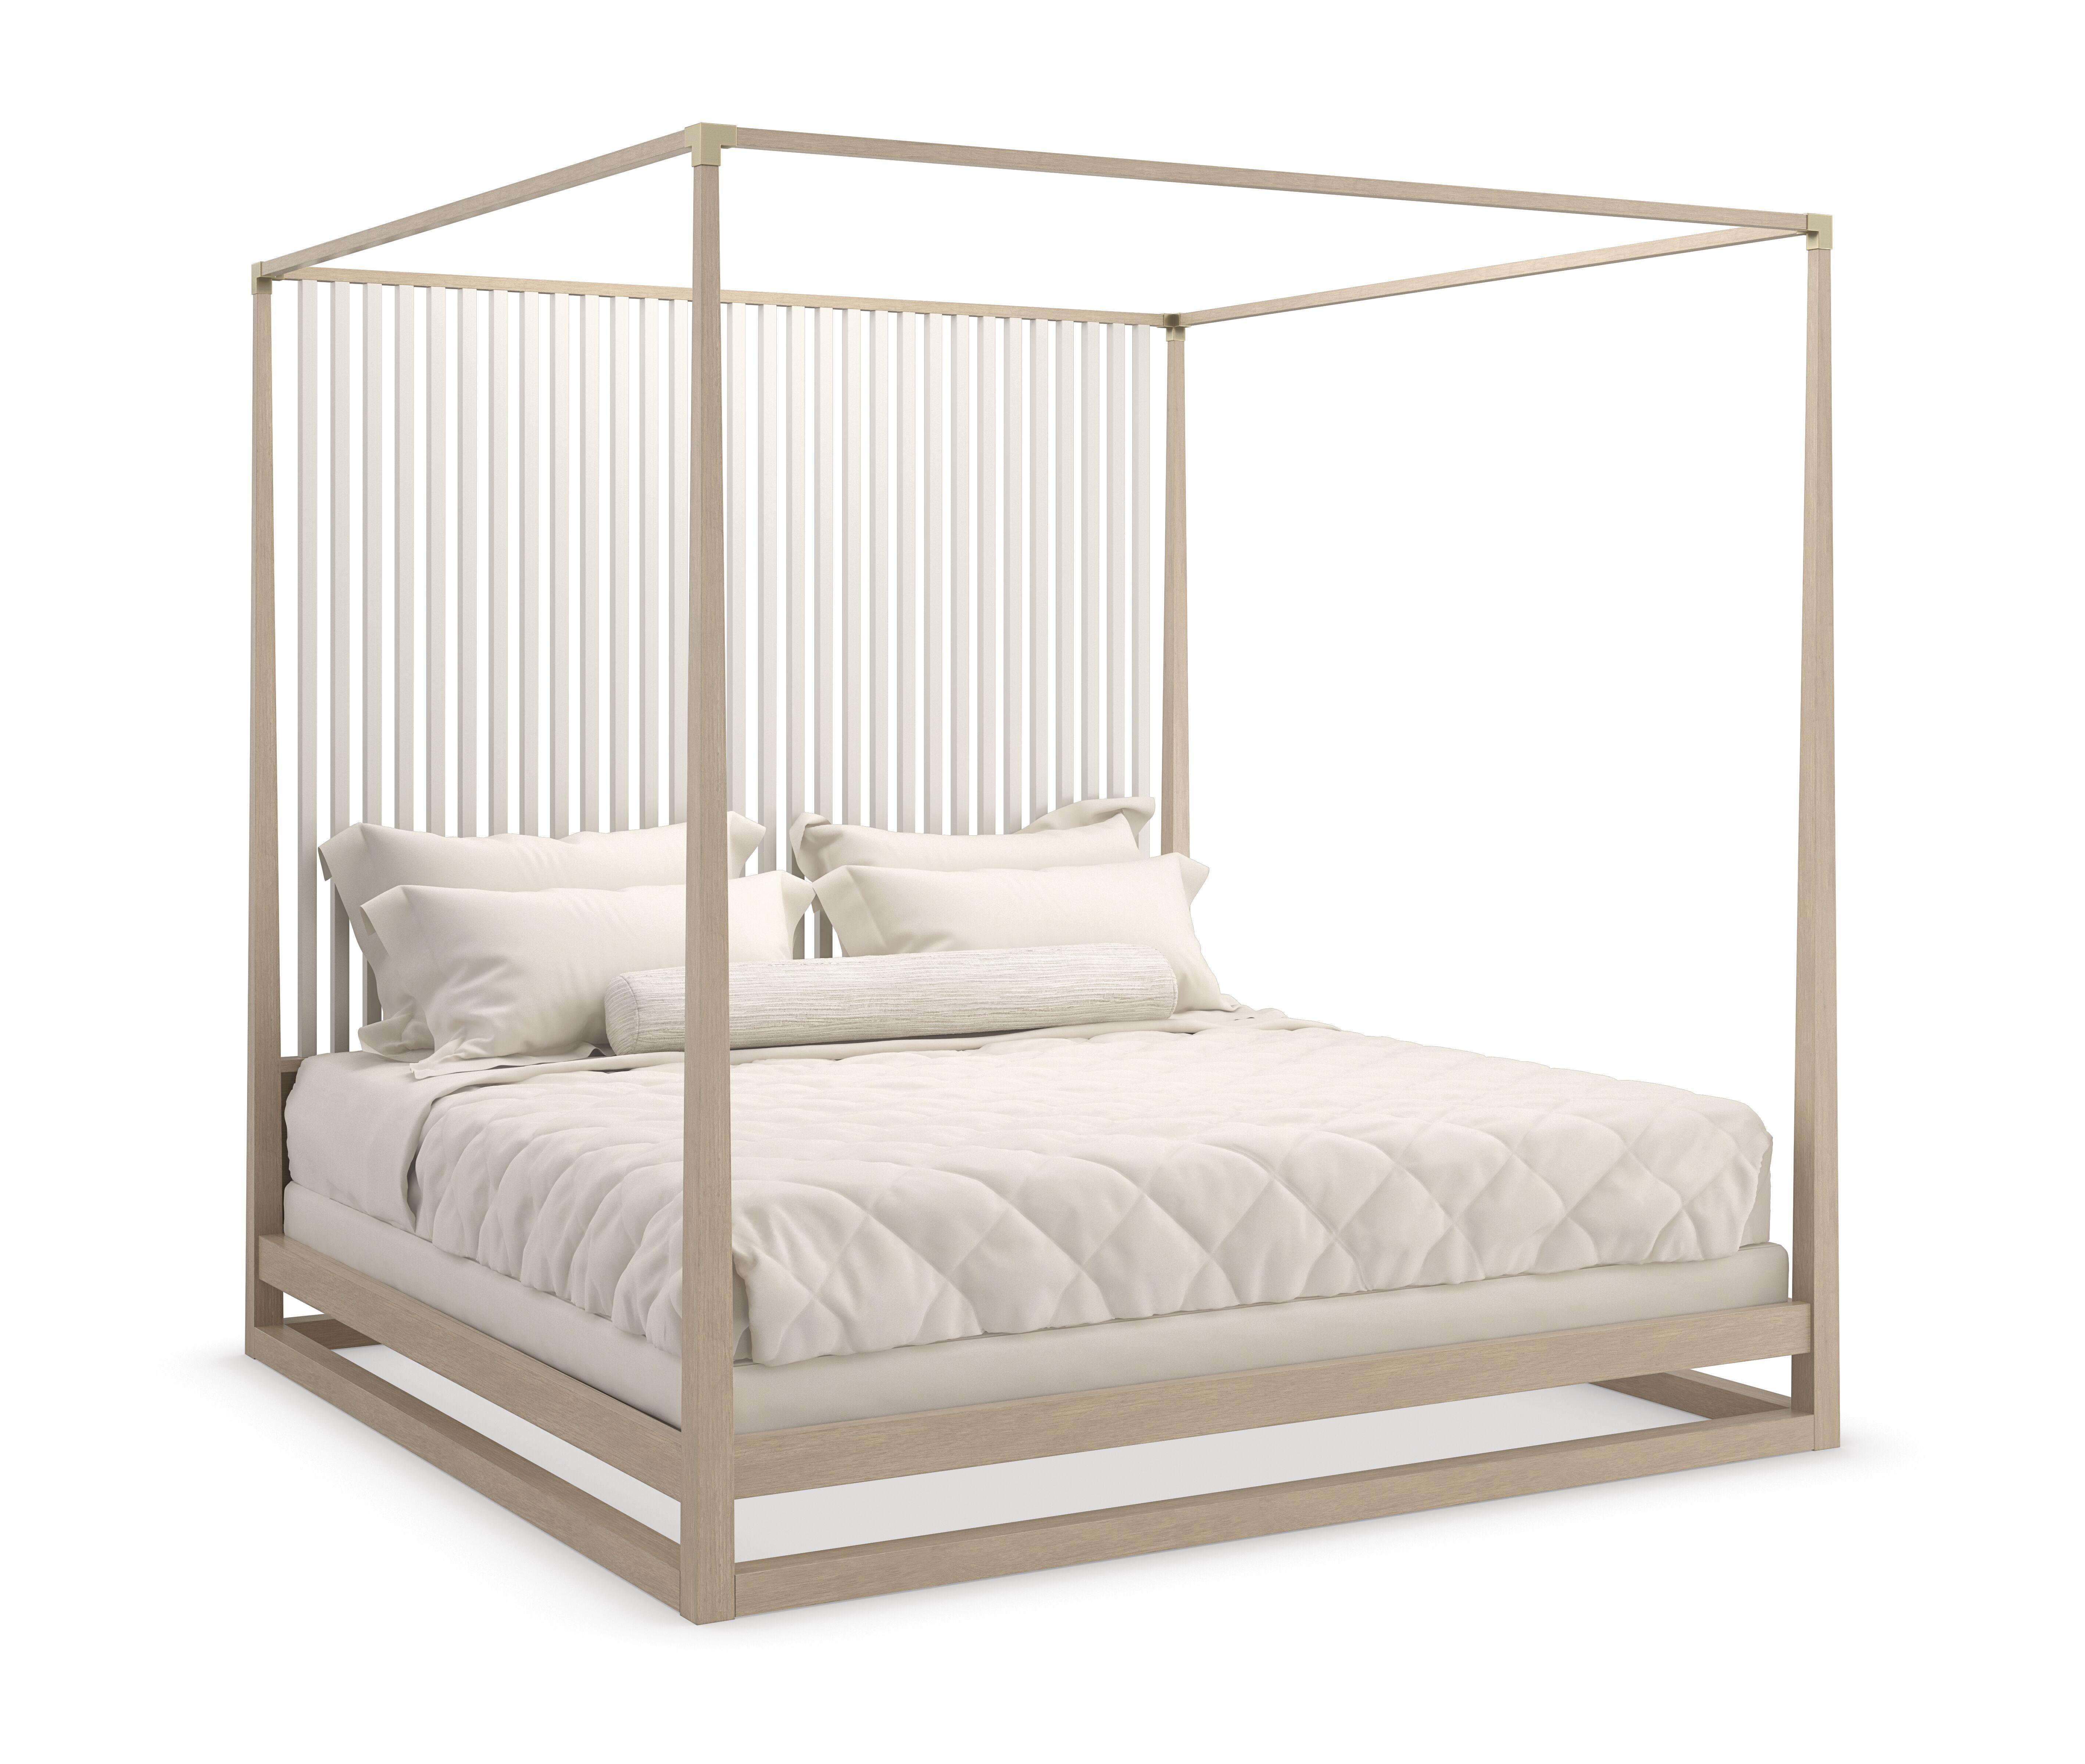 Contemporary Canopy Bed PINSTRIPE LIGHT CLA-022-122 in Almond, Champagne 